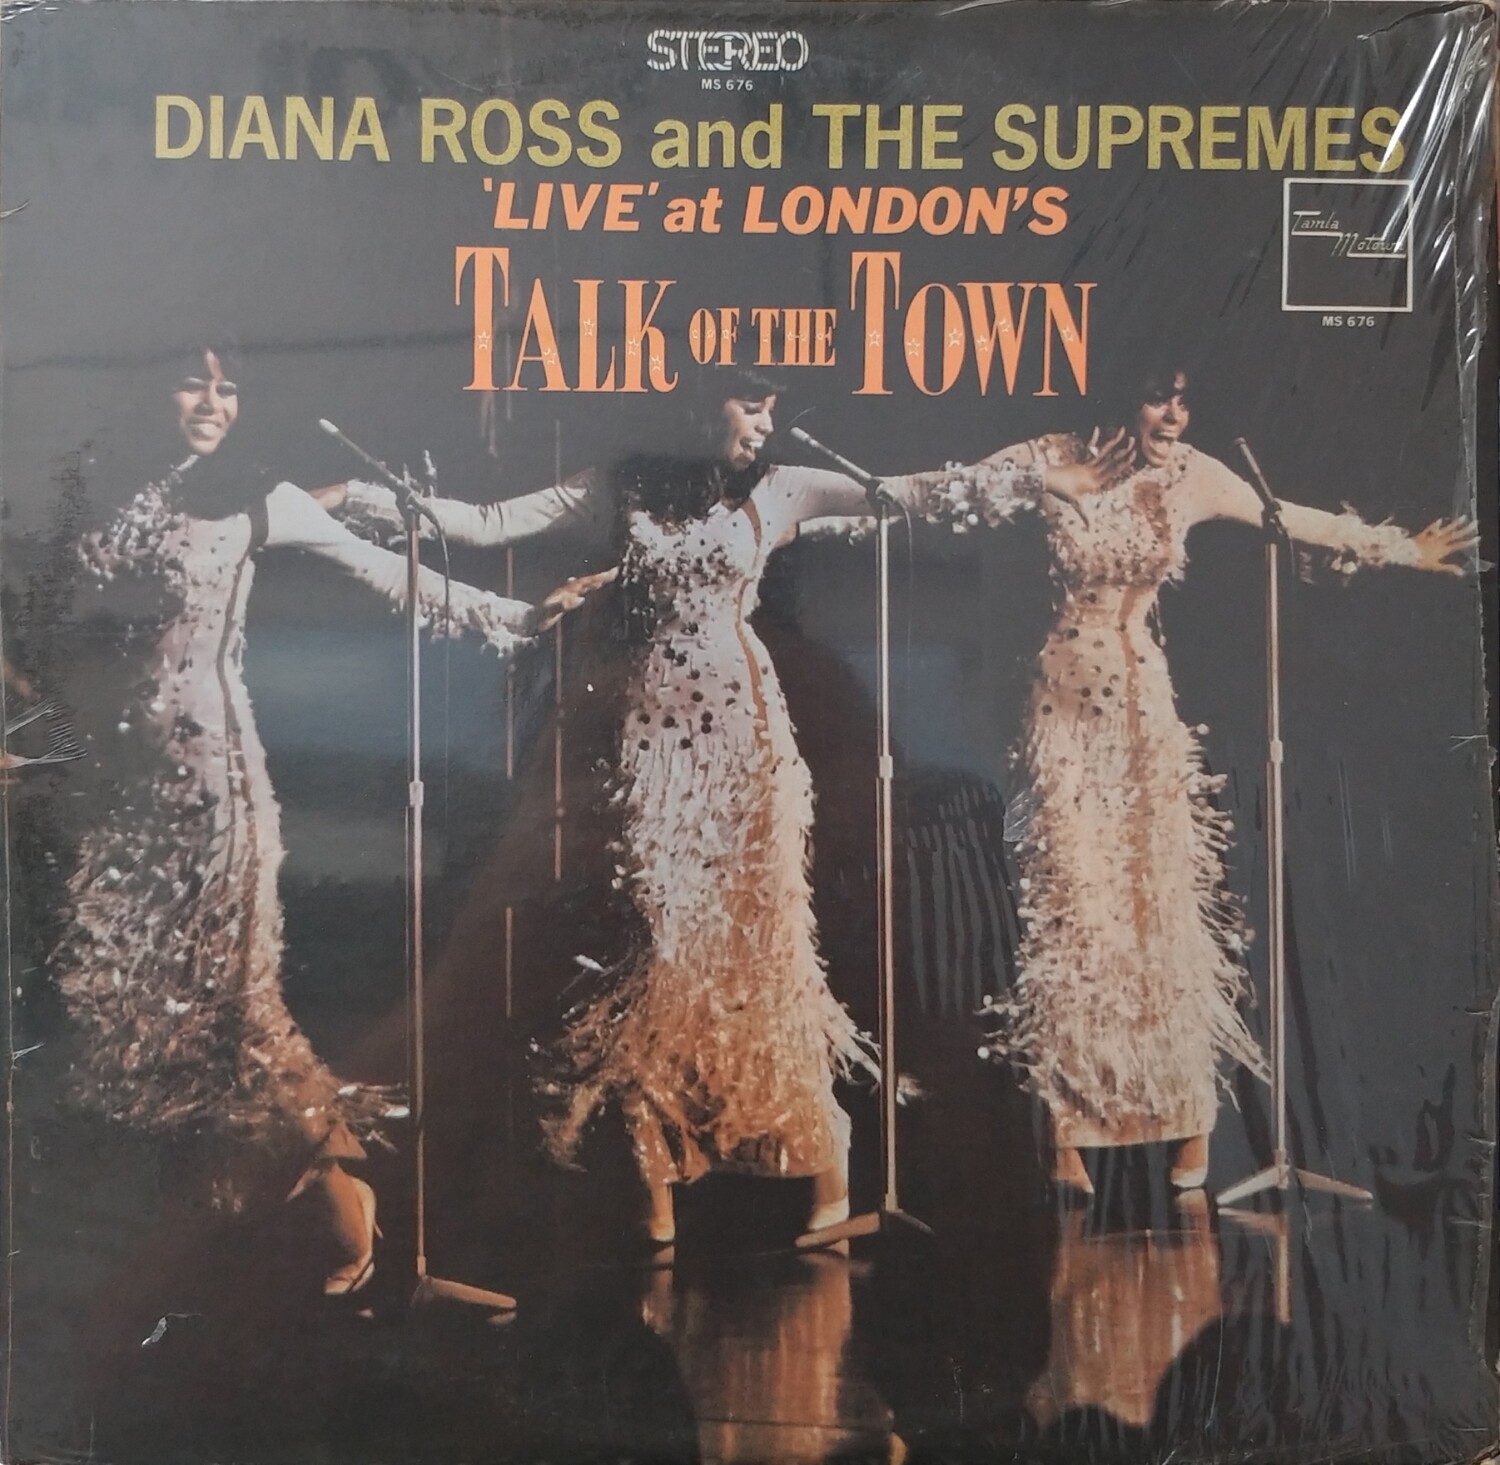 Diana Ross & The Supremes - Live at London's Talk of the town